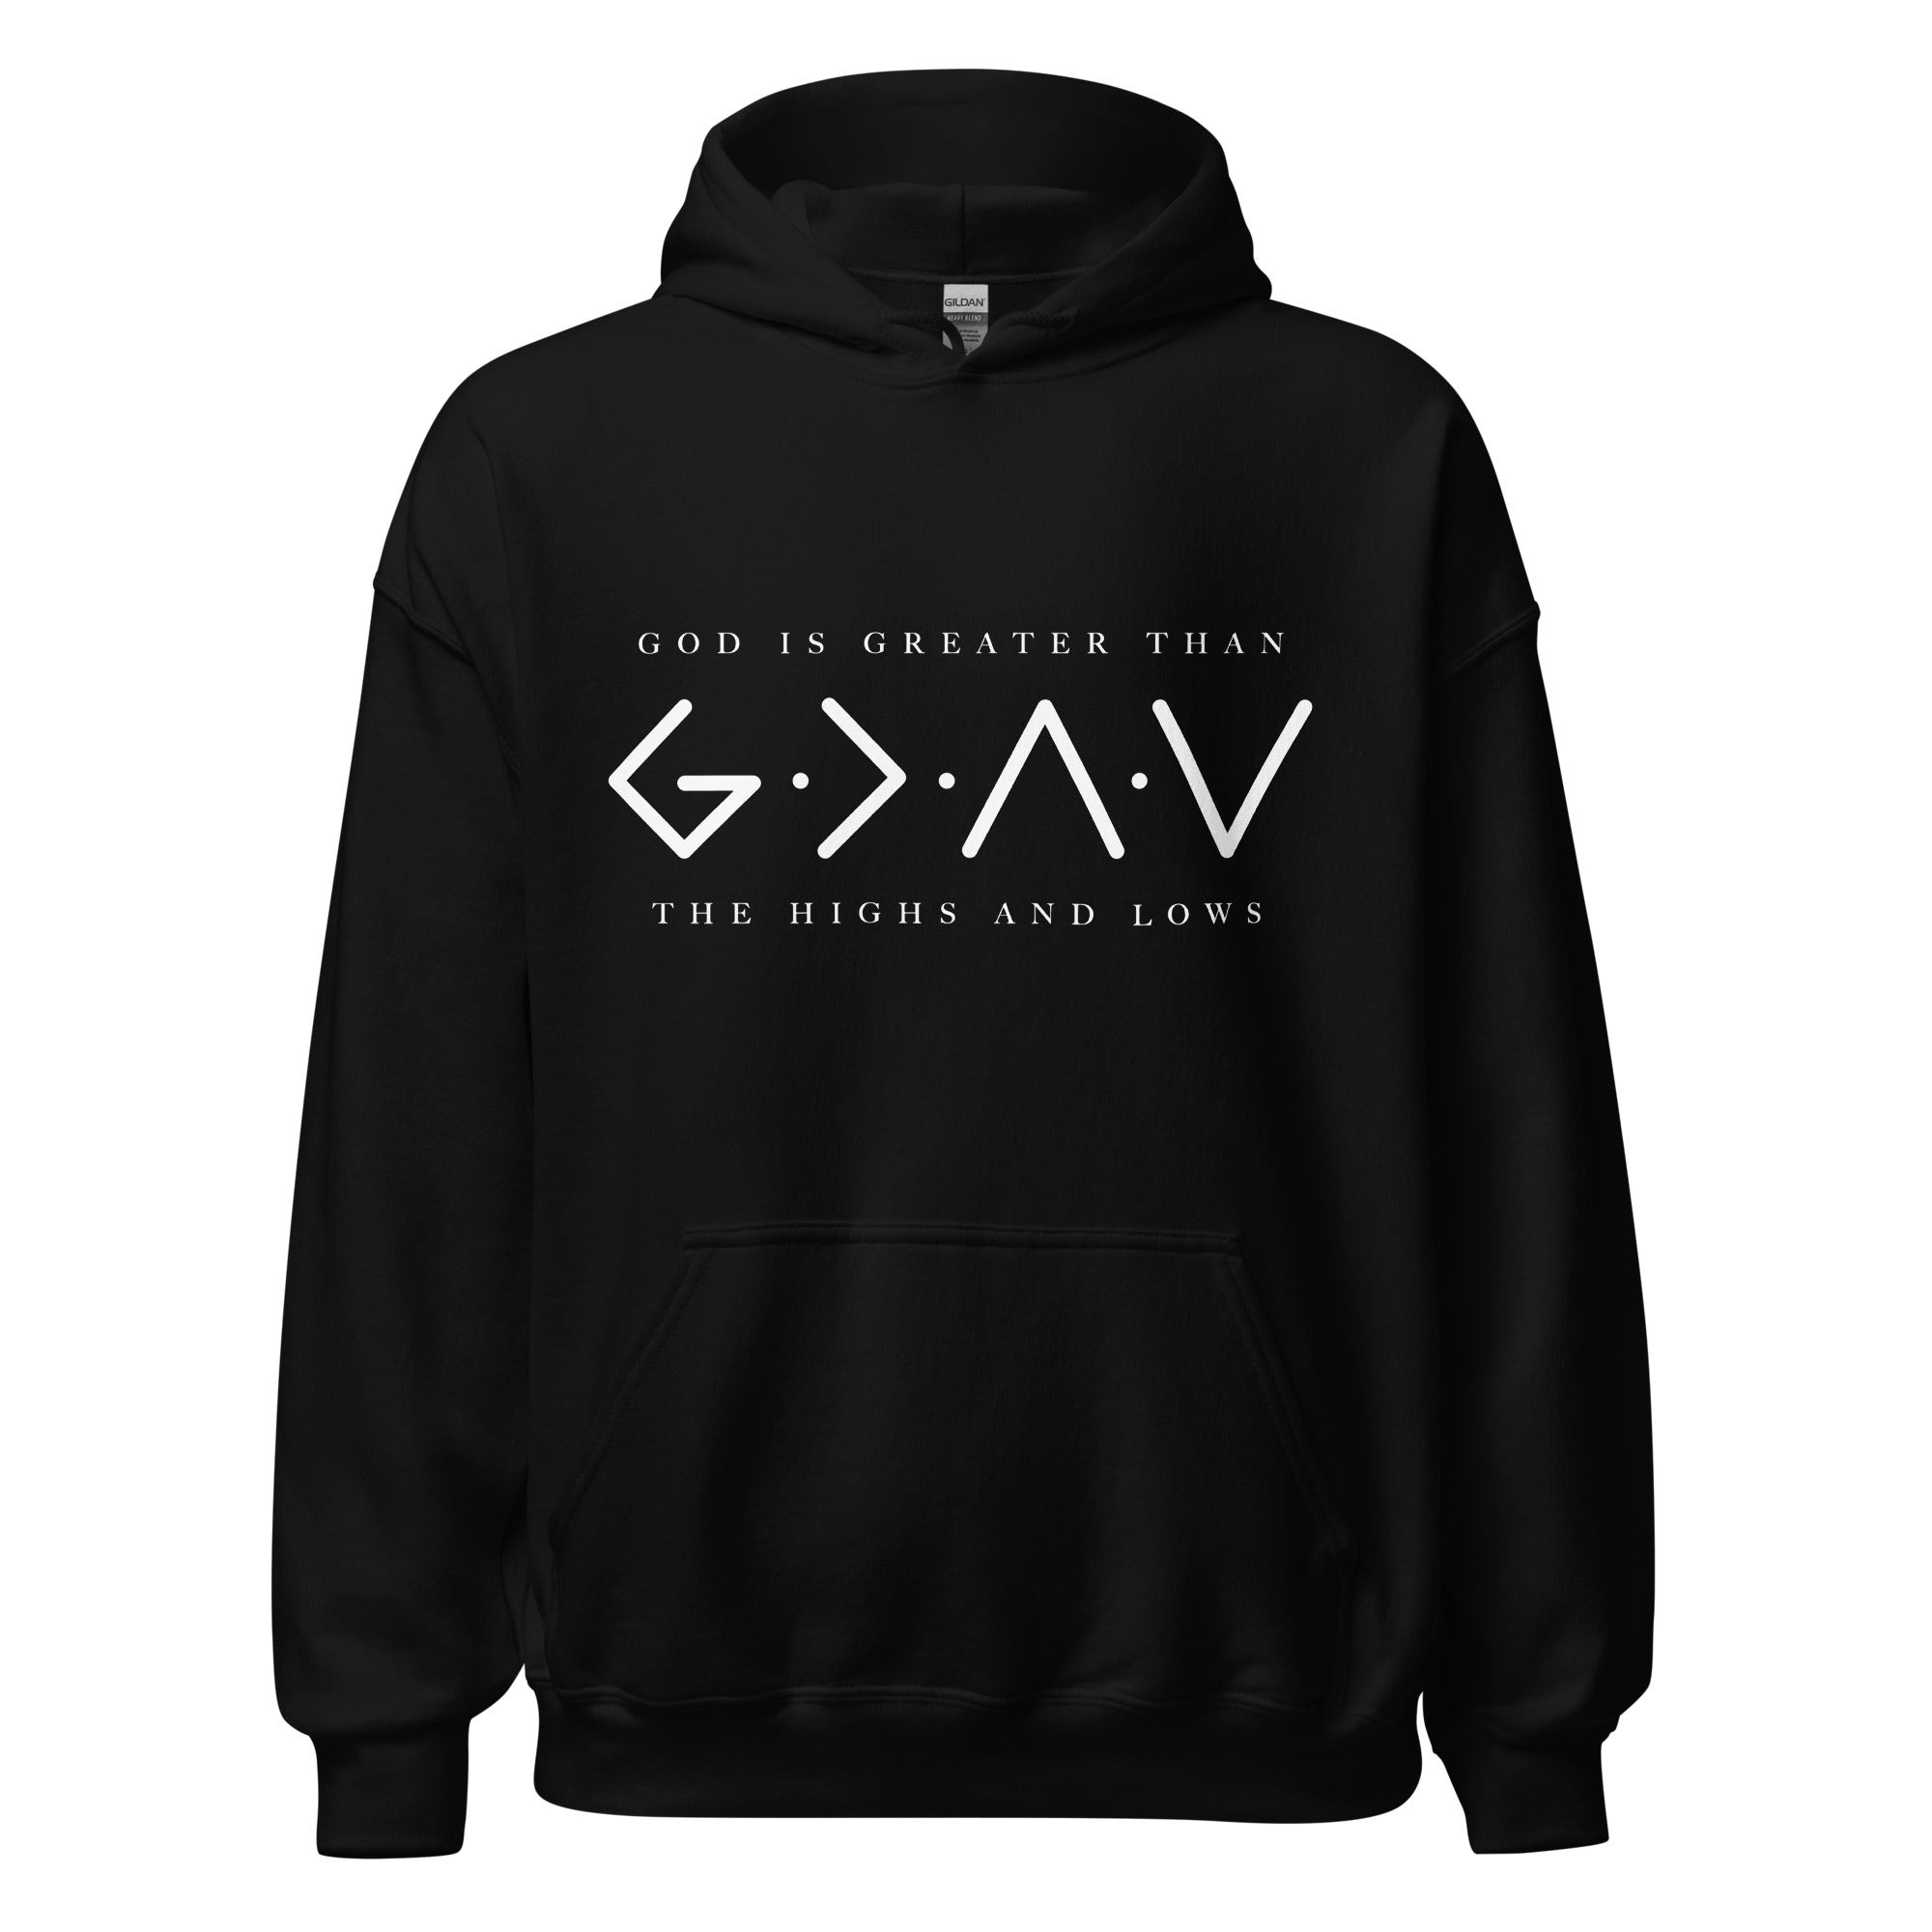 God is Greater Than Highs and Lows Men's Heavy Blend™ Hoodie Color: Black Size: S Jesus Passion Apparel